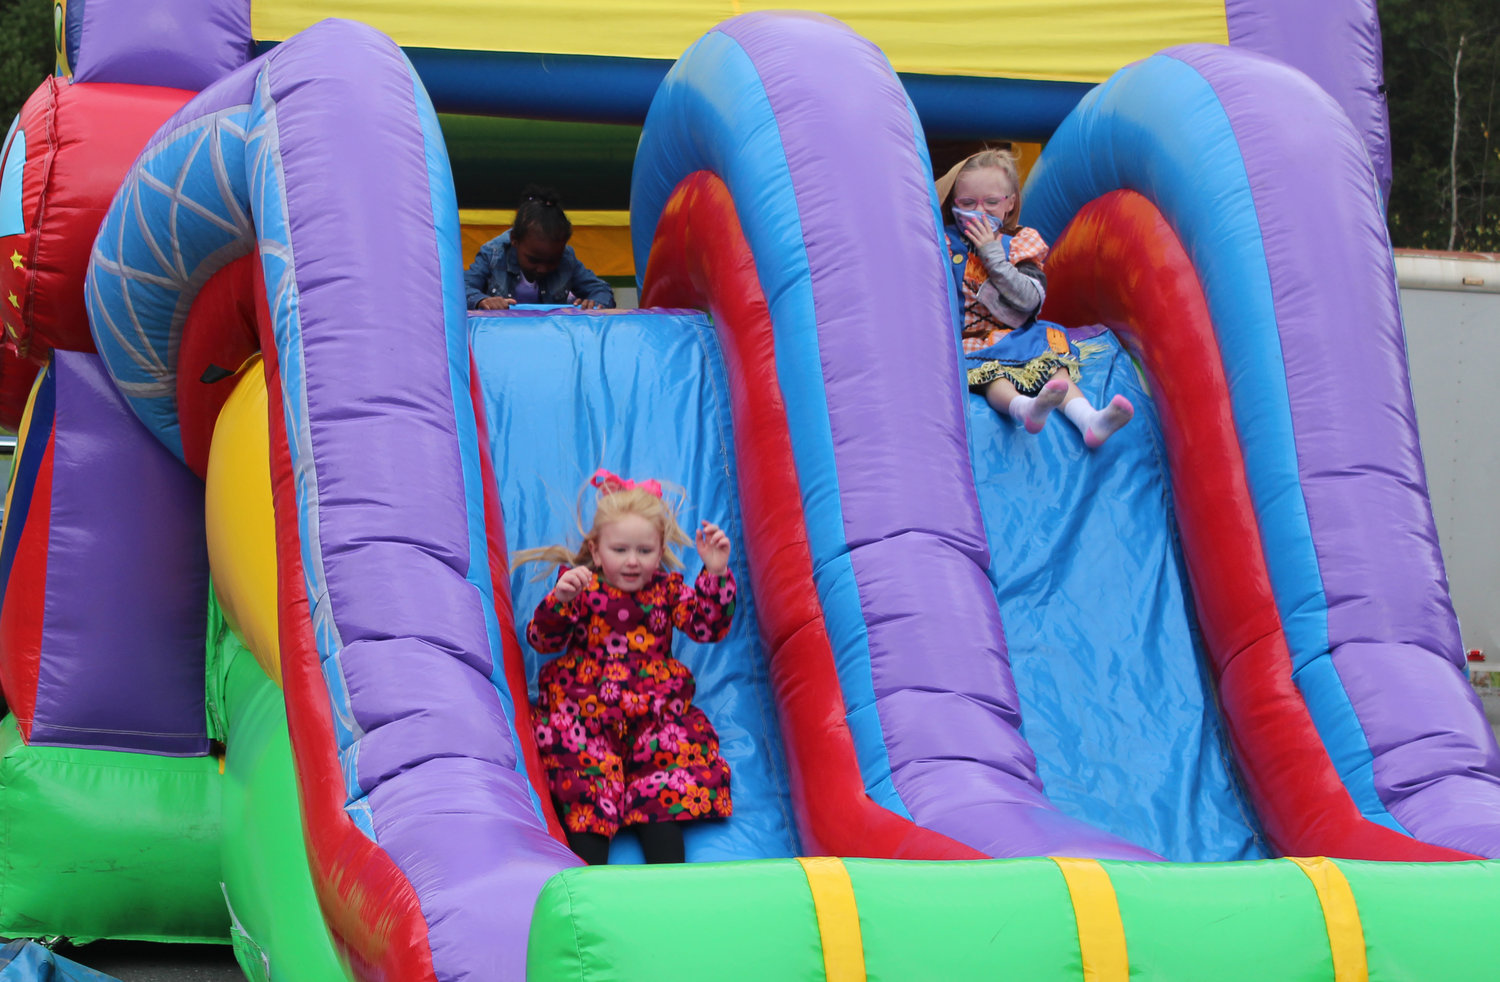 The event offered fun for people of all ages.